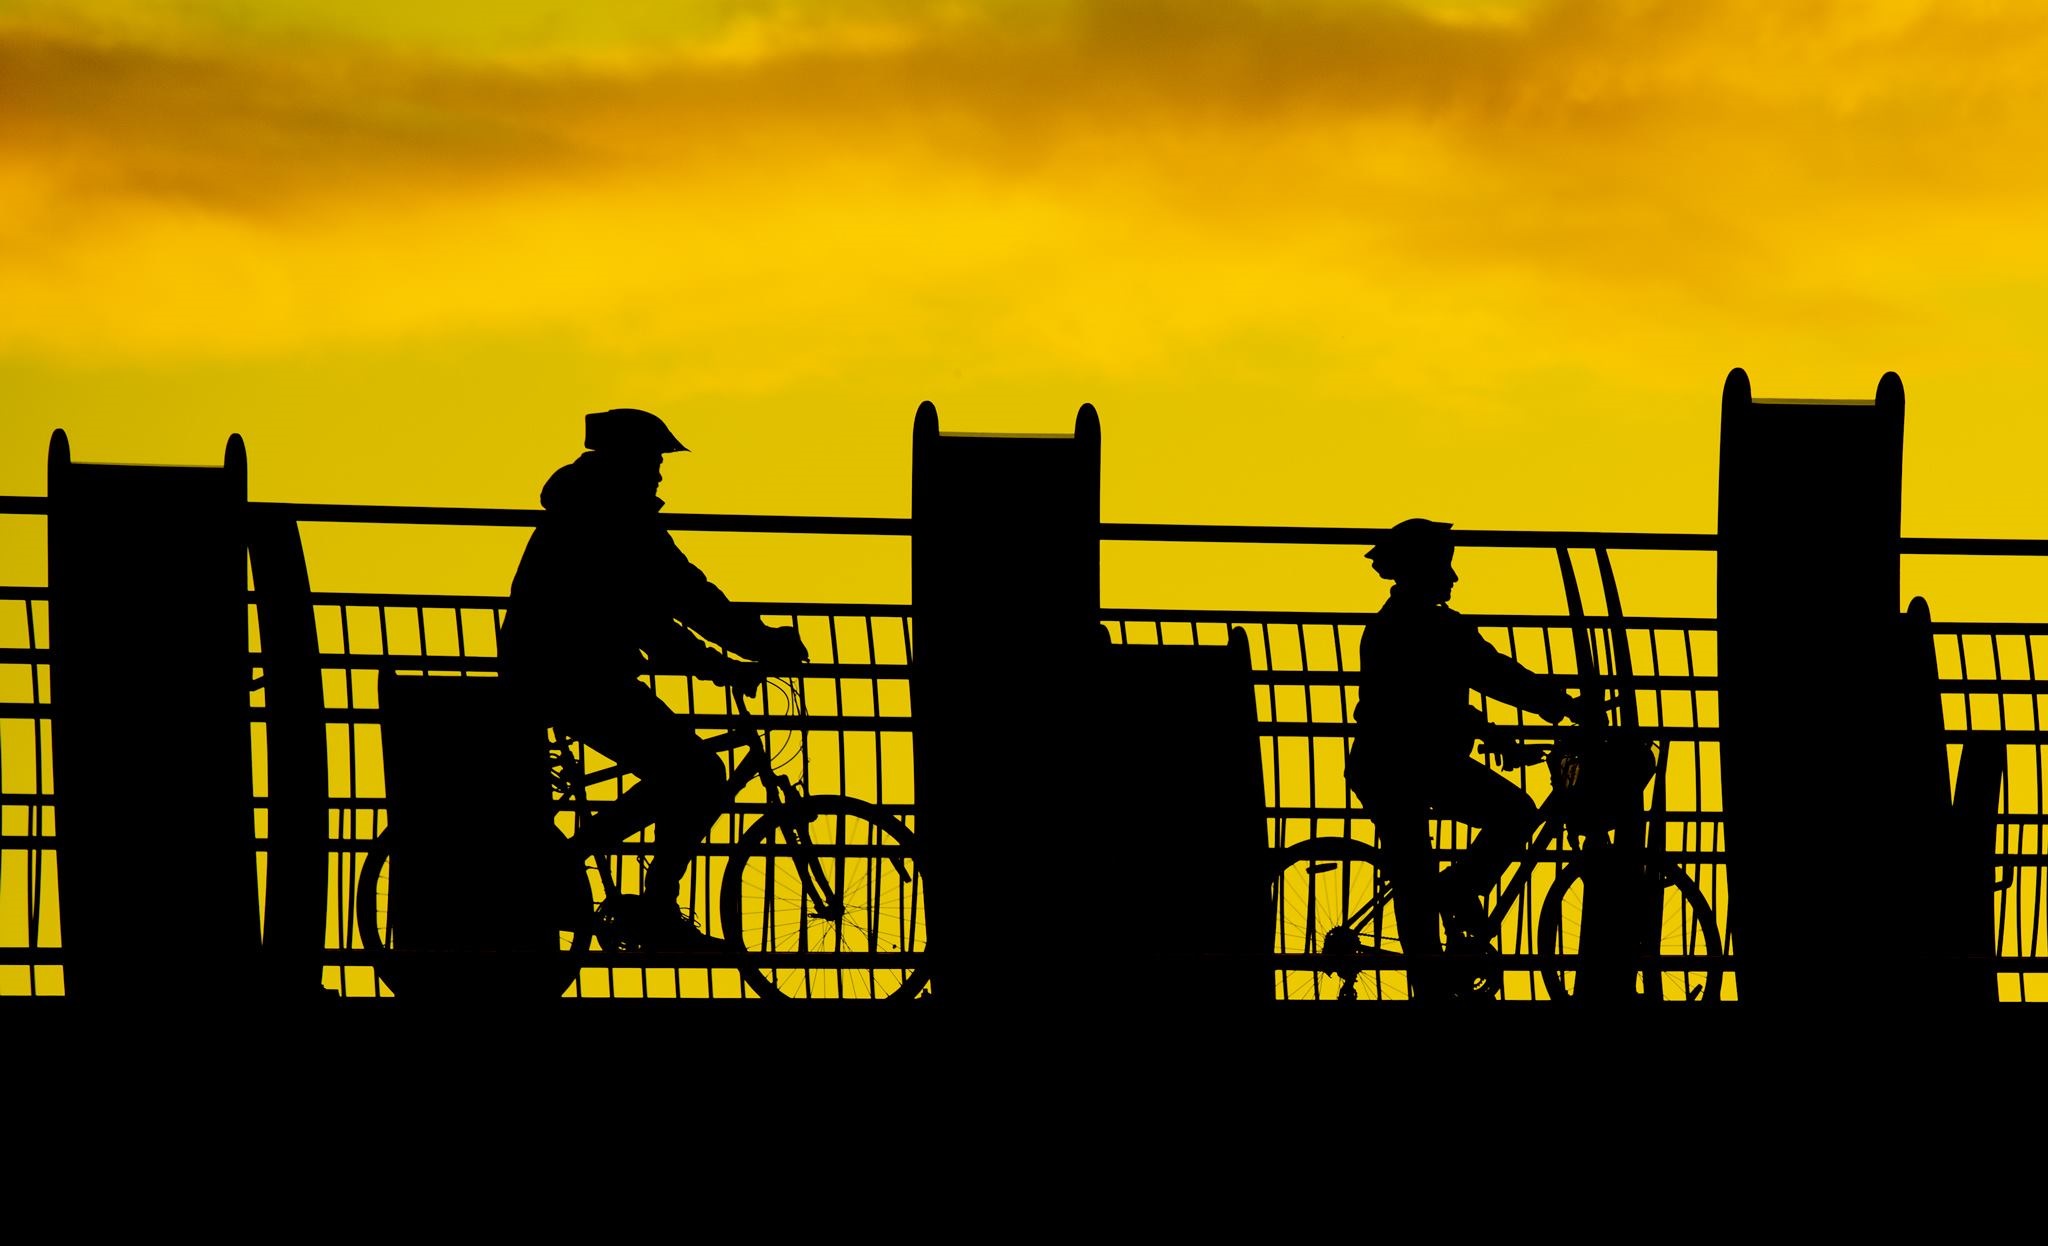 Photo shows two cyclists silhouetted against the skyline as they ride over a bridge.